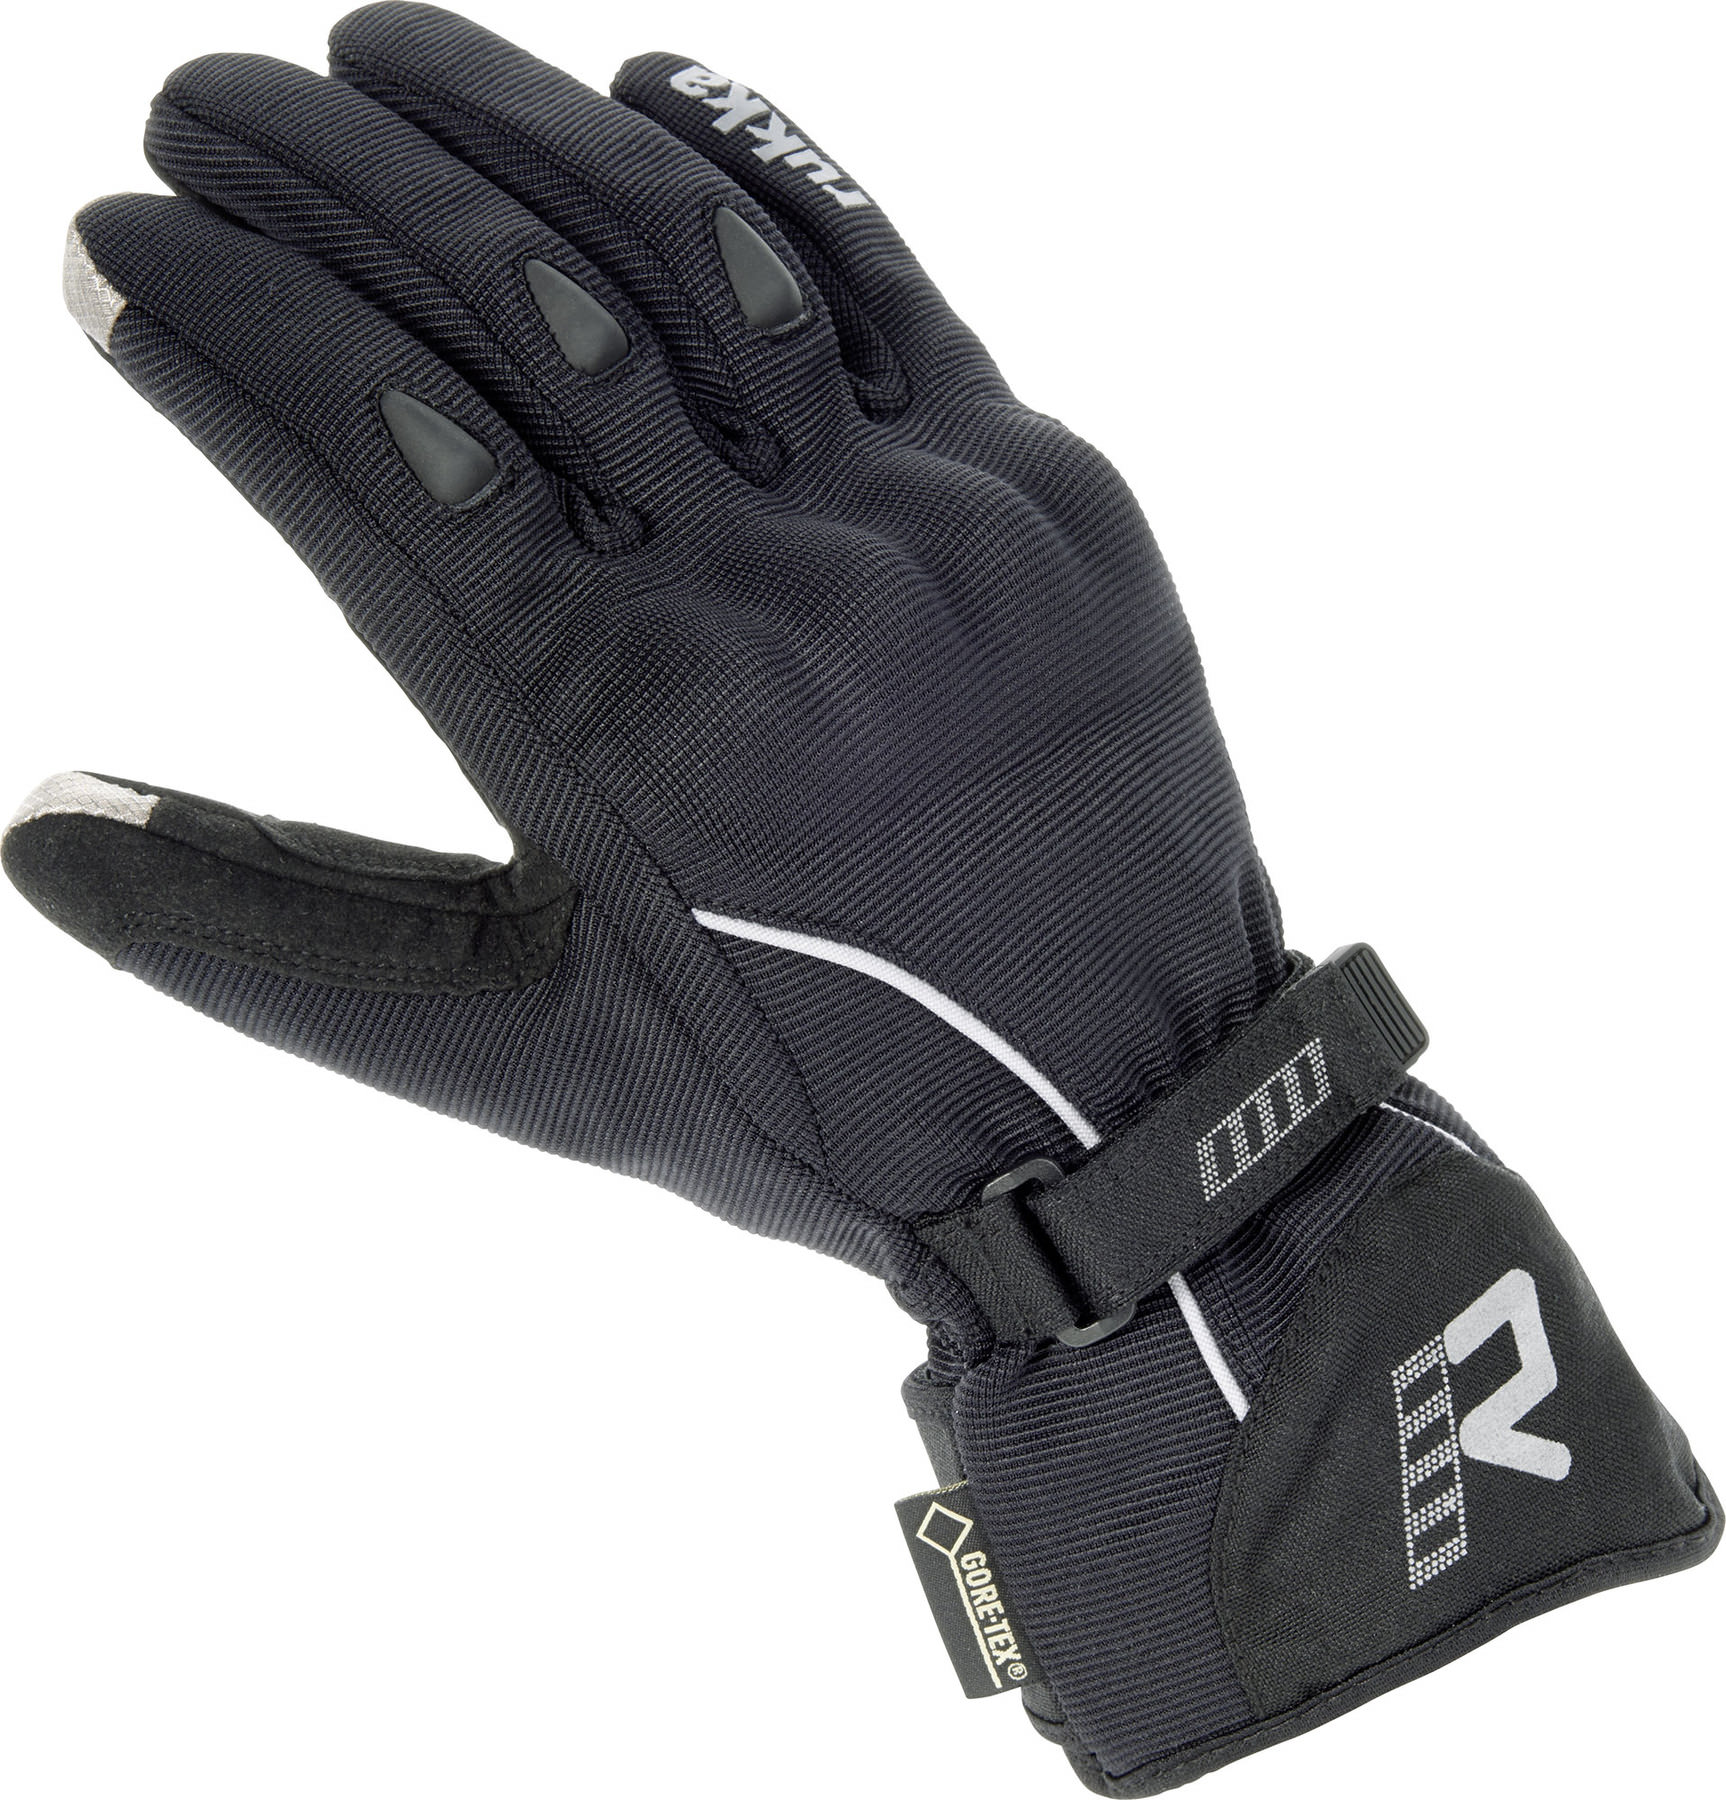 Rukka Virium Gore Tex Gloves Super Touchscreen Suitable With Knuckle Protector